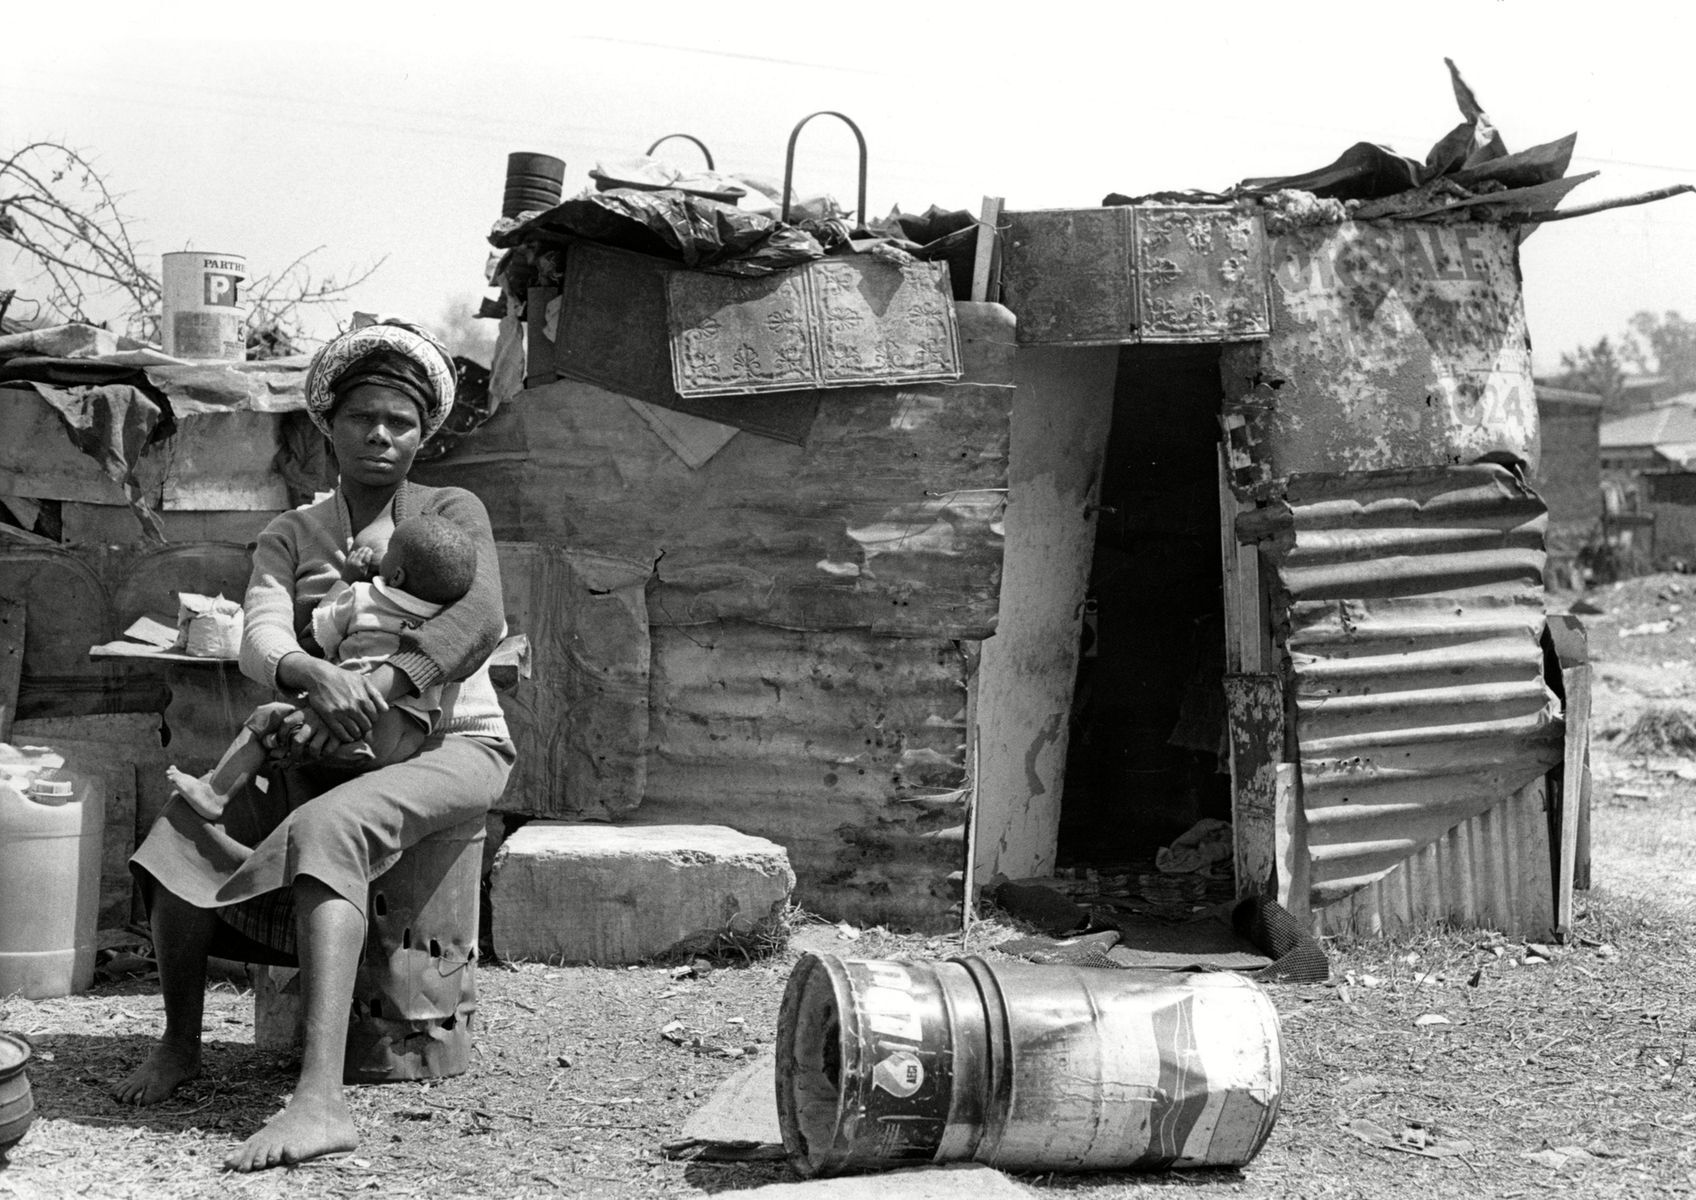 <p>Segregation of non-whites had always existed in South Africa, but in 1948, separation of the races was formalized under <a href="https://www.history.com/topics/africa/apartheid" rel="noreferrer noopener">apartheid</a>. New laws relegated some blacks to <a href="https://overcomingapartheid.msu.edu/multimedia.php?kid=163-582-19" rel="noreferrer noopener">“homelands” or bantustans</a> and excluded them from South African citizenship. The rest of the black population, considered a source of labour, lived in <a href="https://link.springer.com/referenceworkentry/10.1007/978-94-007-0753-5_4186" rel="noreferrer noopener">veritable ghettos, known as townships</a>, surrounding the cities (see photo above). As a lawyer, Mandela <a href="https://www.nelsonmandela.org/content/page/biography" rel="noreferrer noopener">defended the rights of those dispossessed</a> by this process.</p>